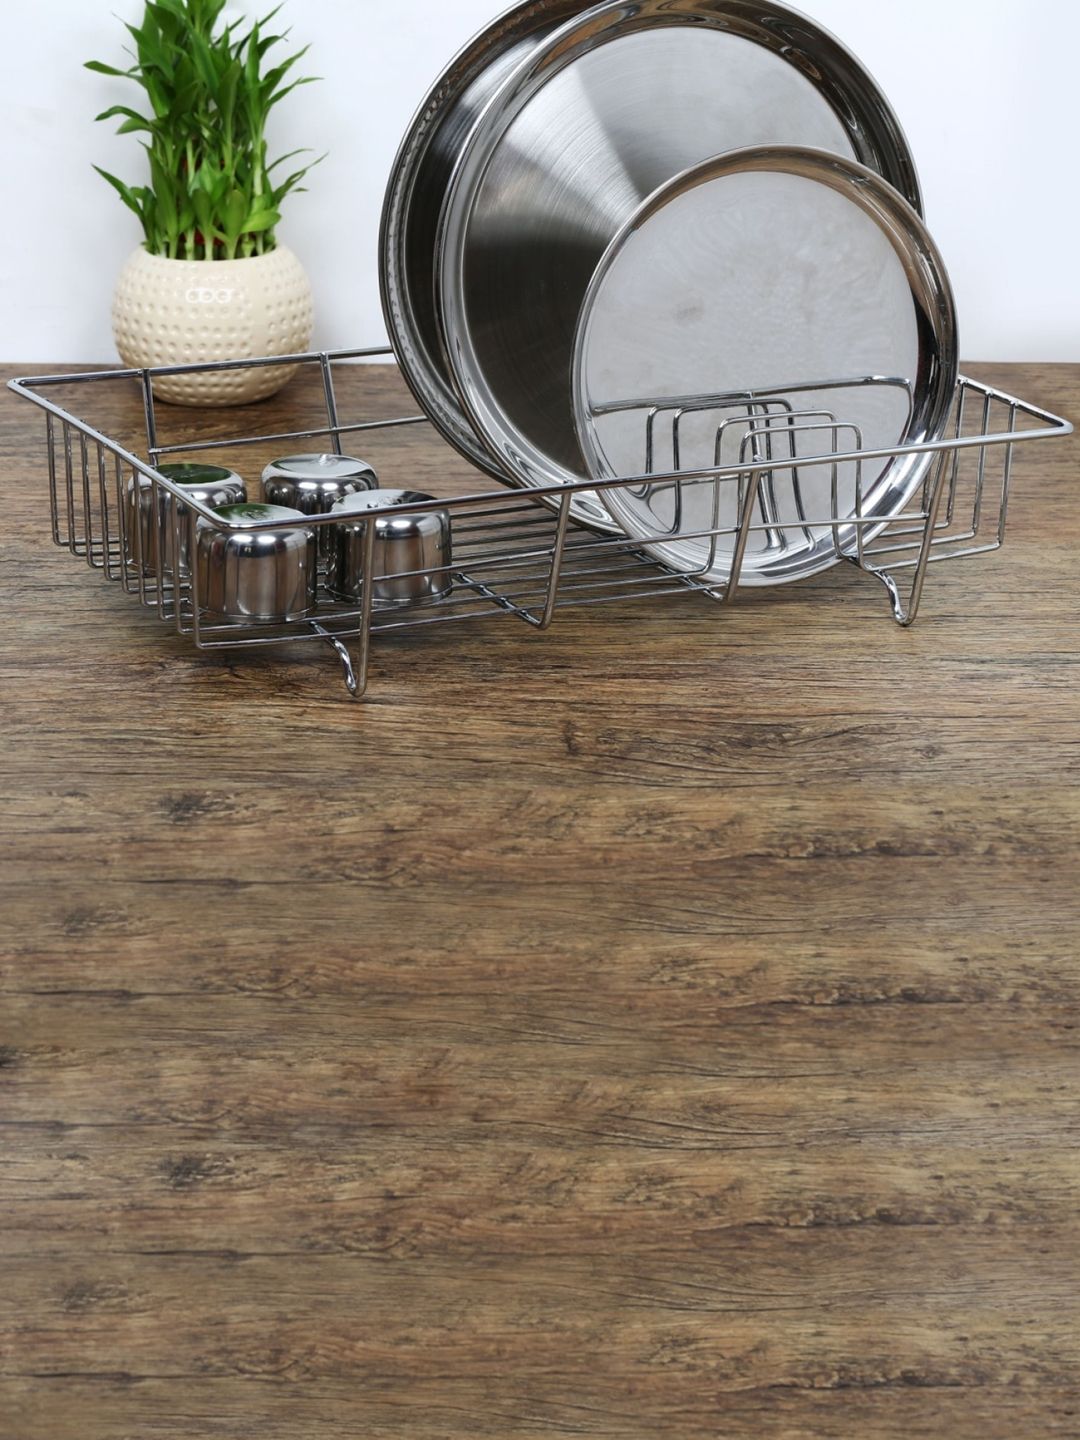 Home Centre Silver-Toned Raiden Dish Washer Rack Price in India